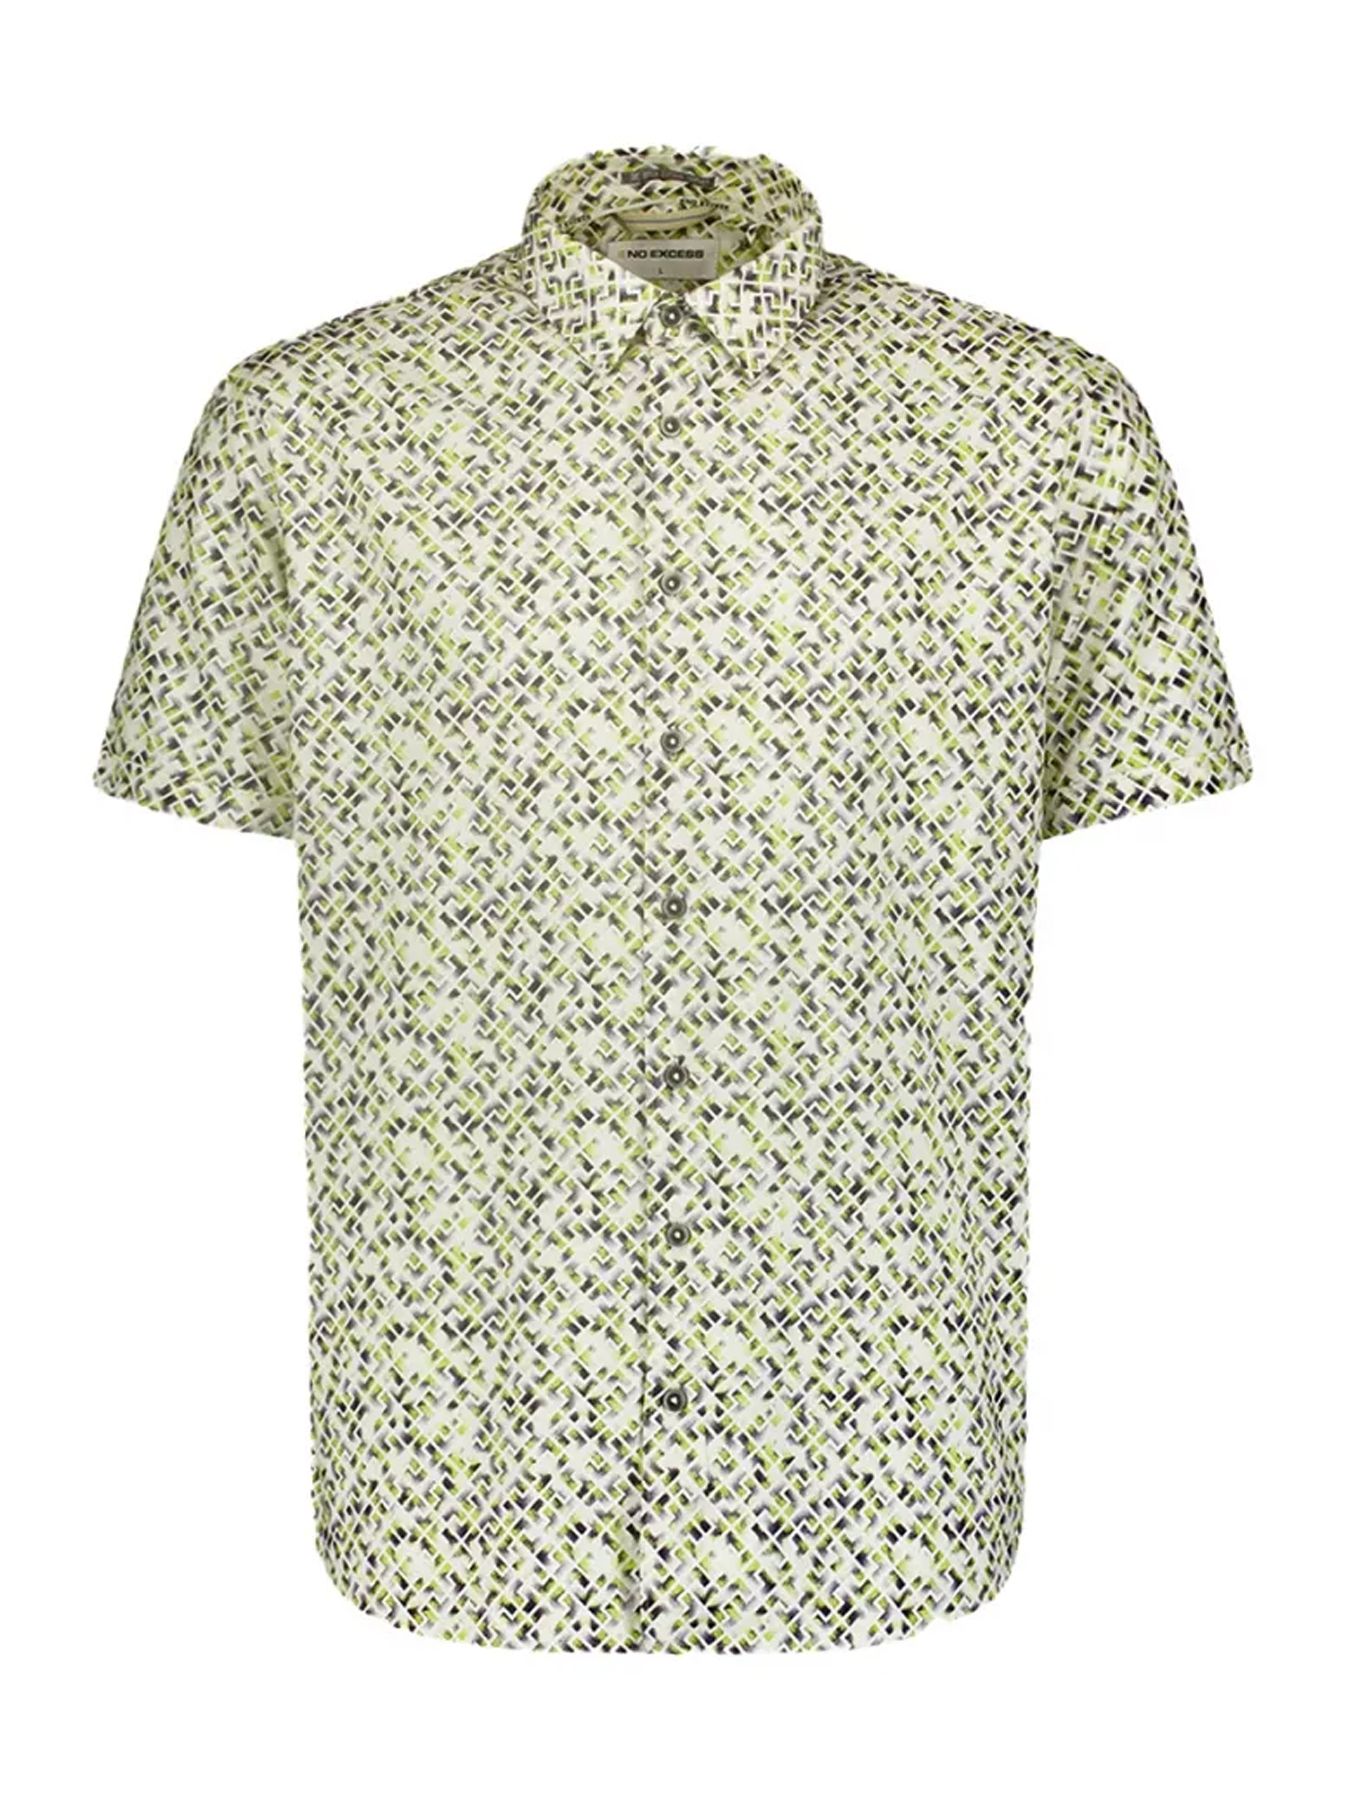 No Excess Shirt Short Sleeve Allover Printed 056 lime 2900146140067